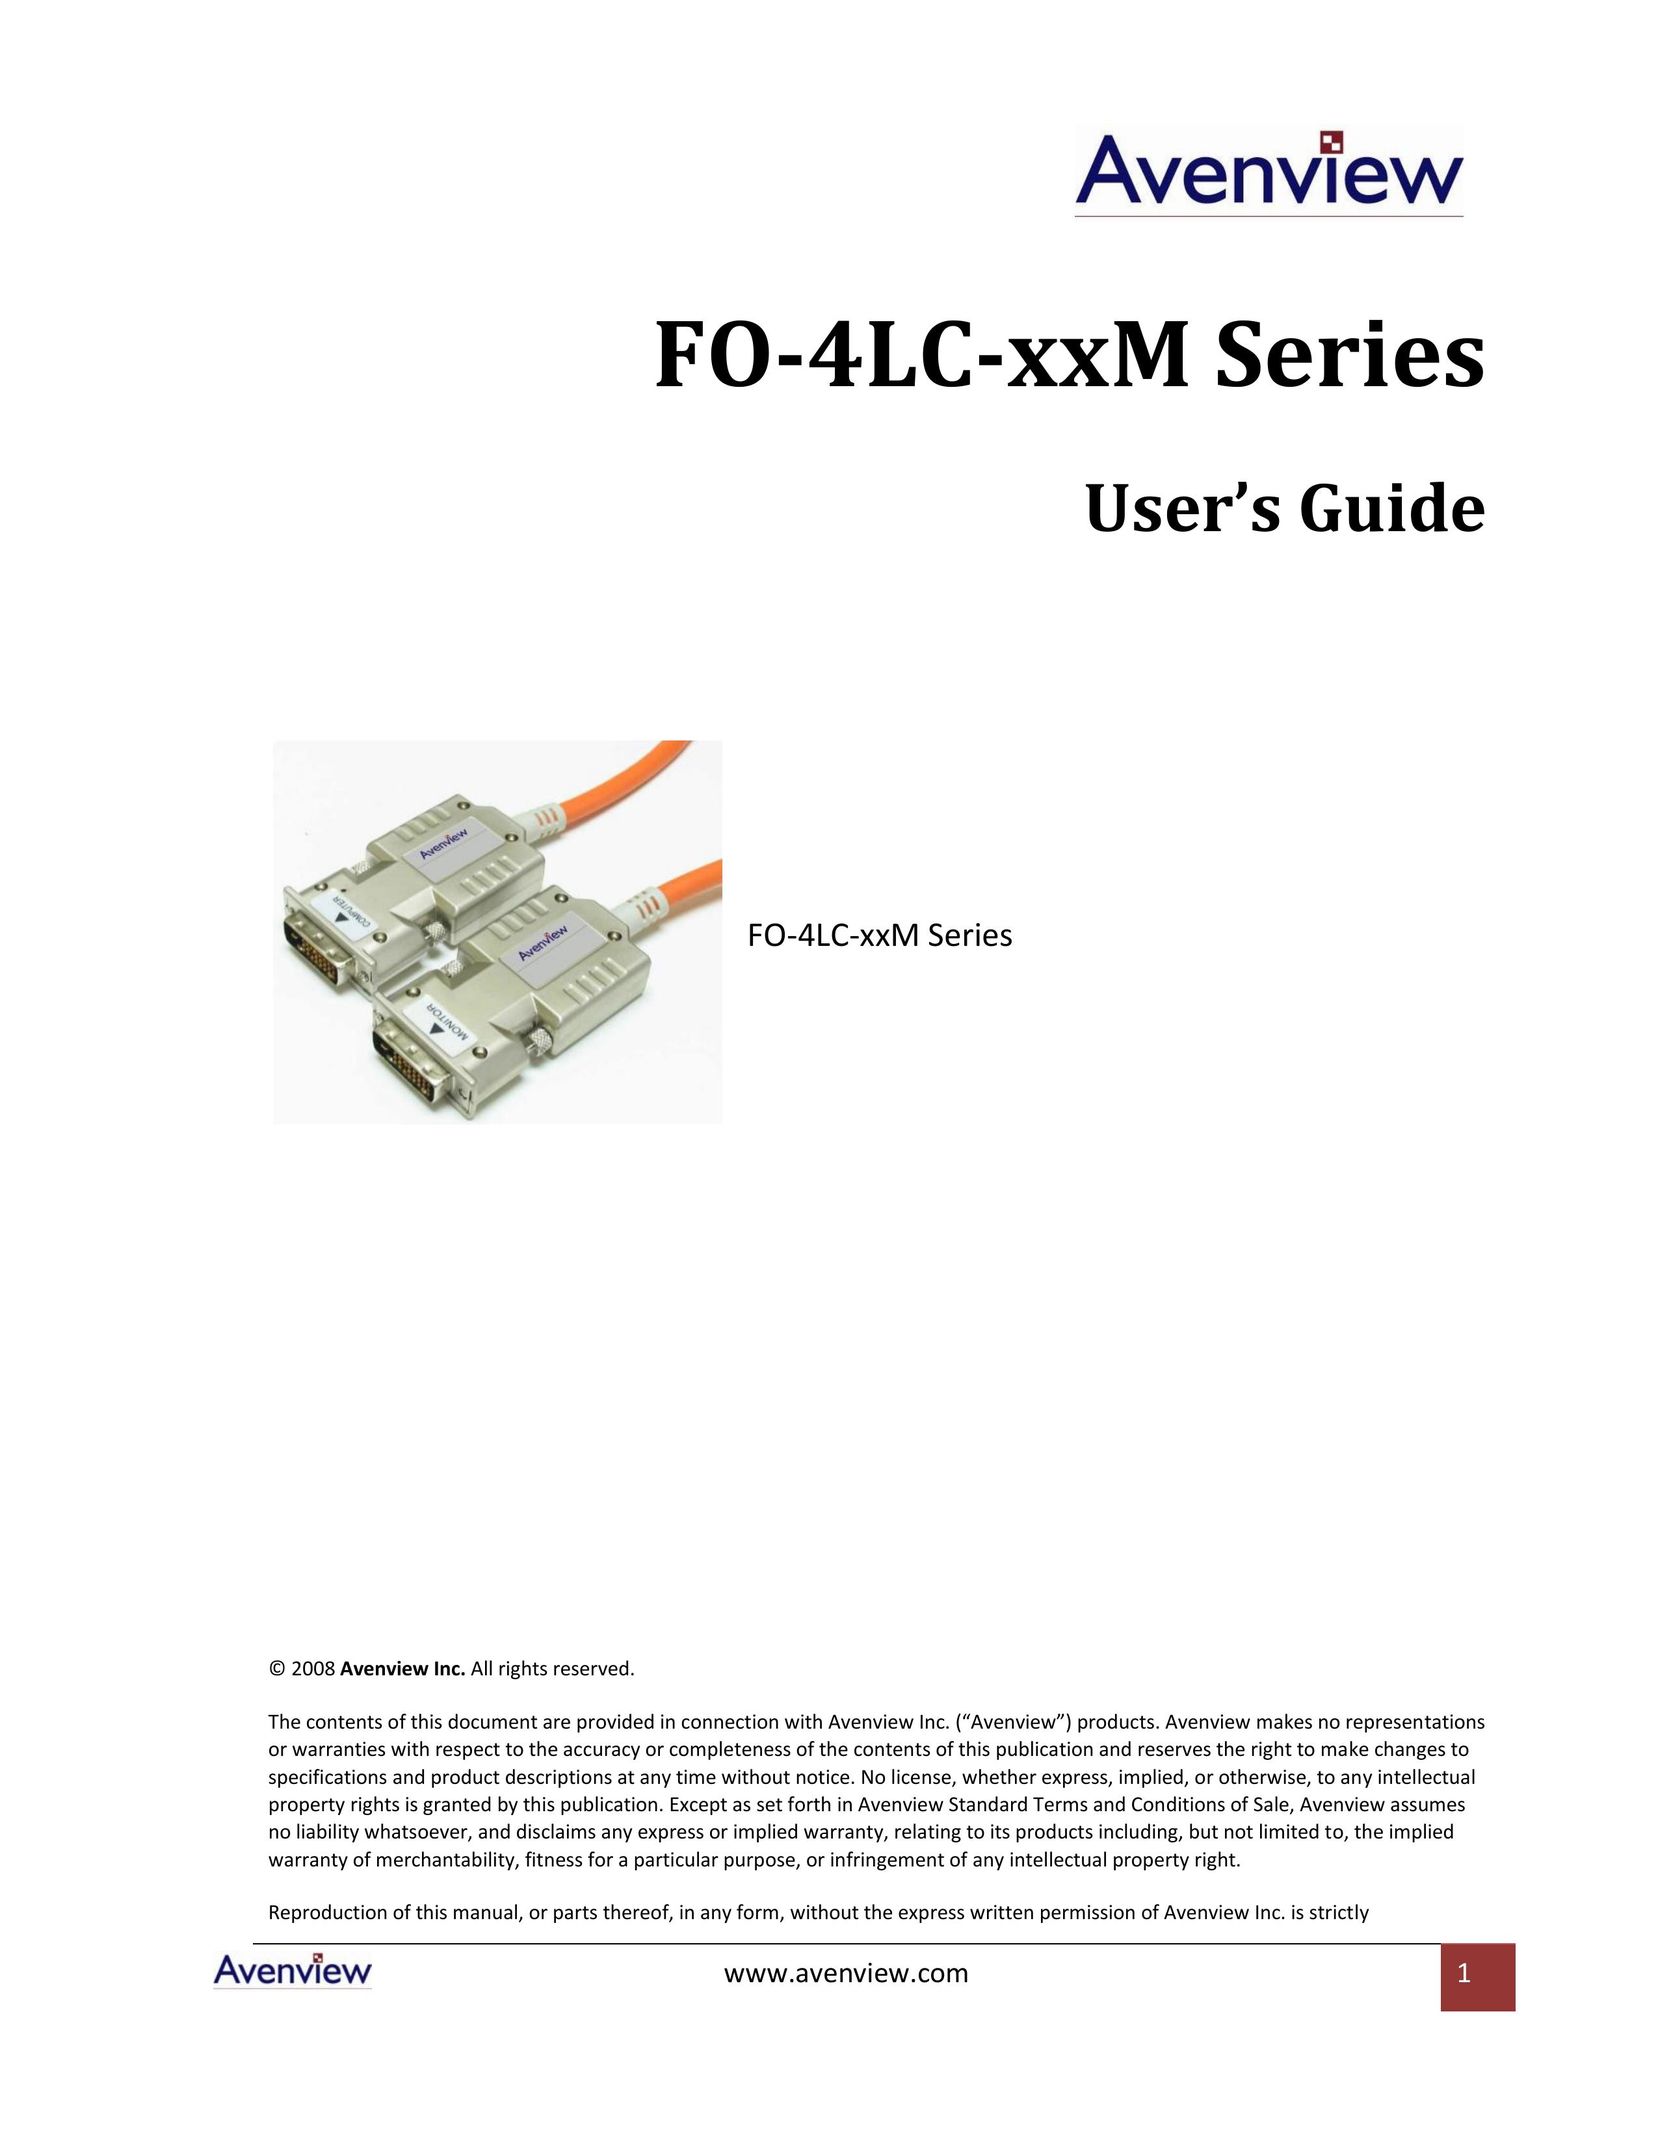 Avenview FO-4LC-xxM Series TV Cables User Manual